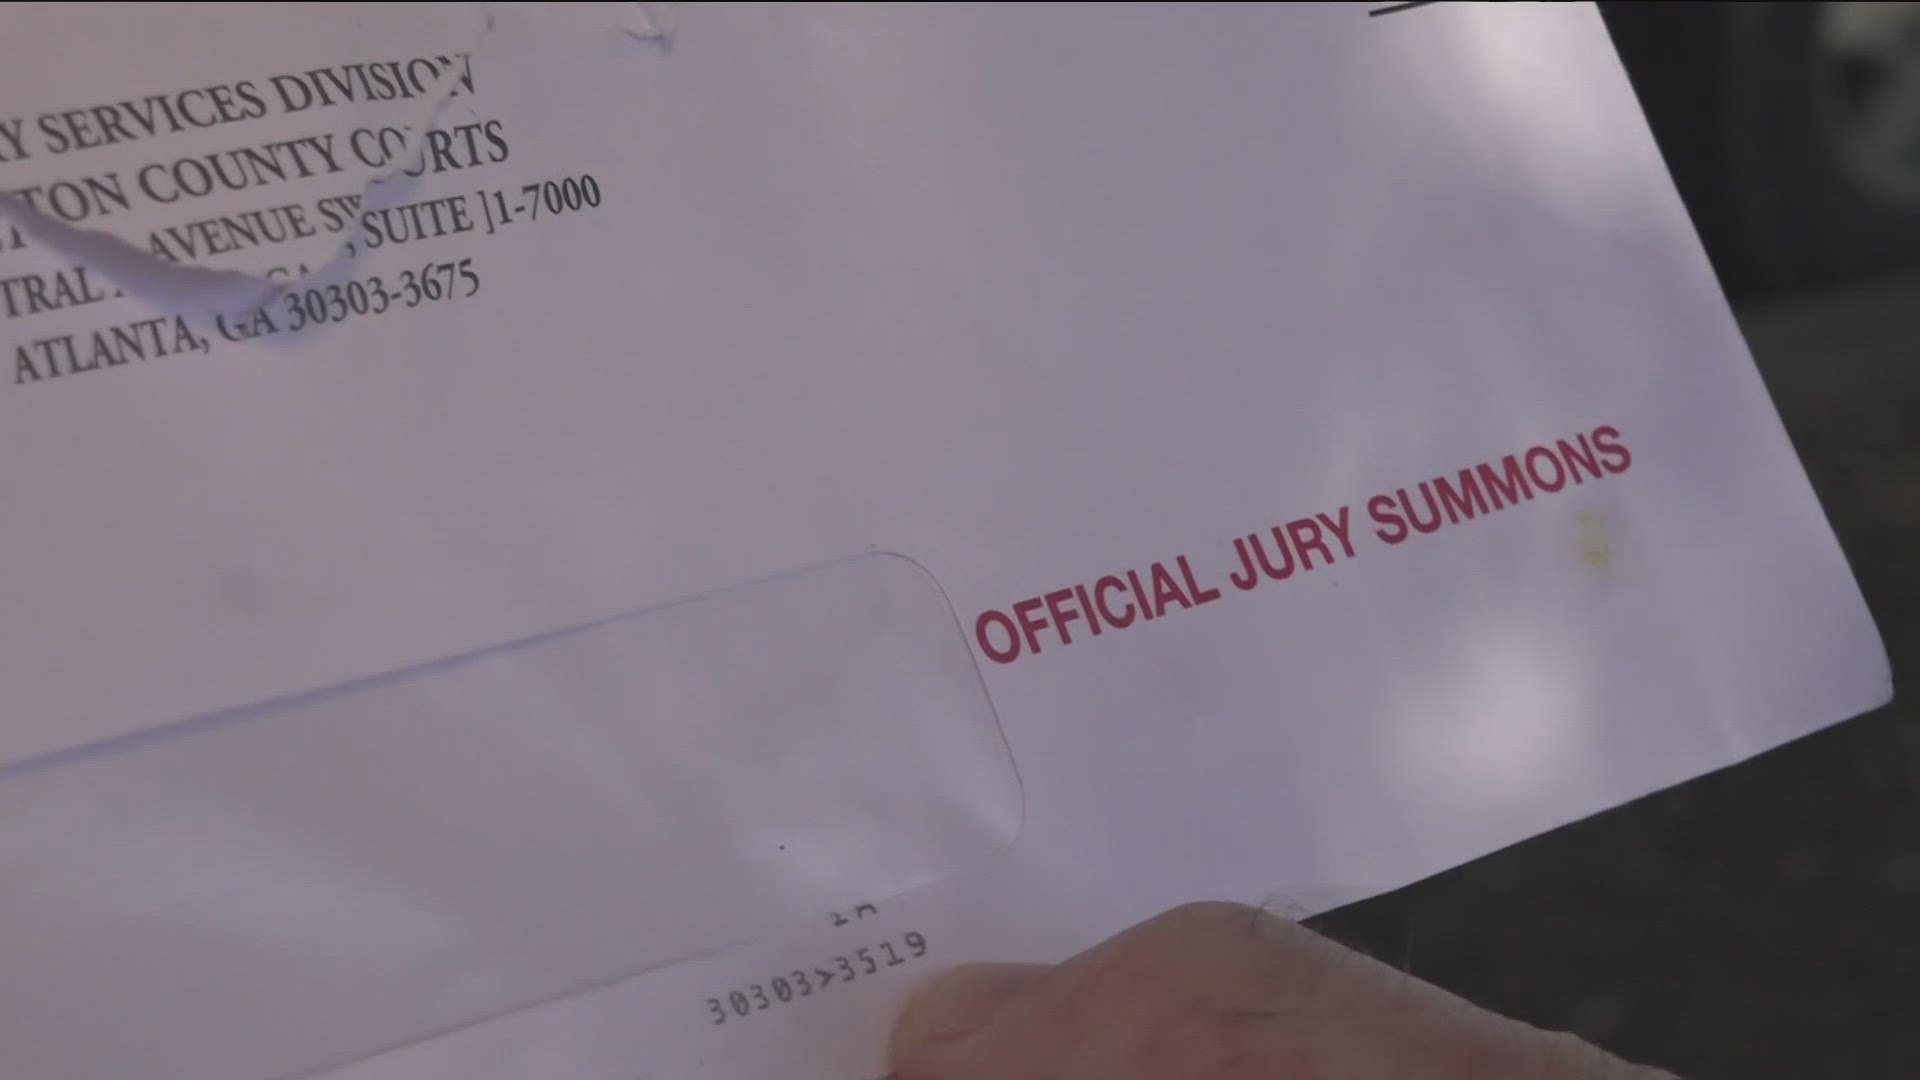 Jack Rosenthal said he had checked his mailbox on June 3 and found a jury summons from Fulton County Superior Court.